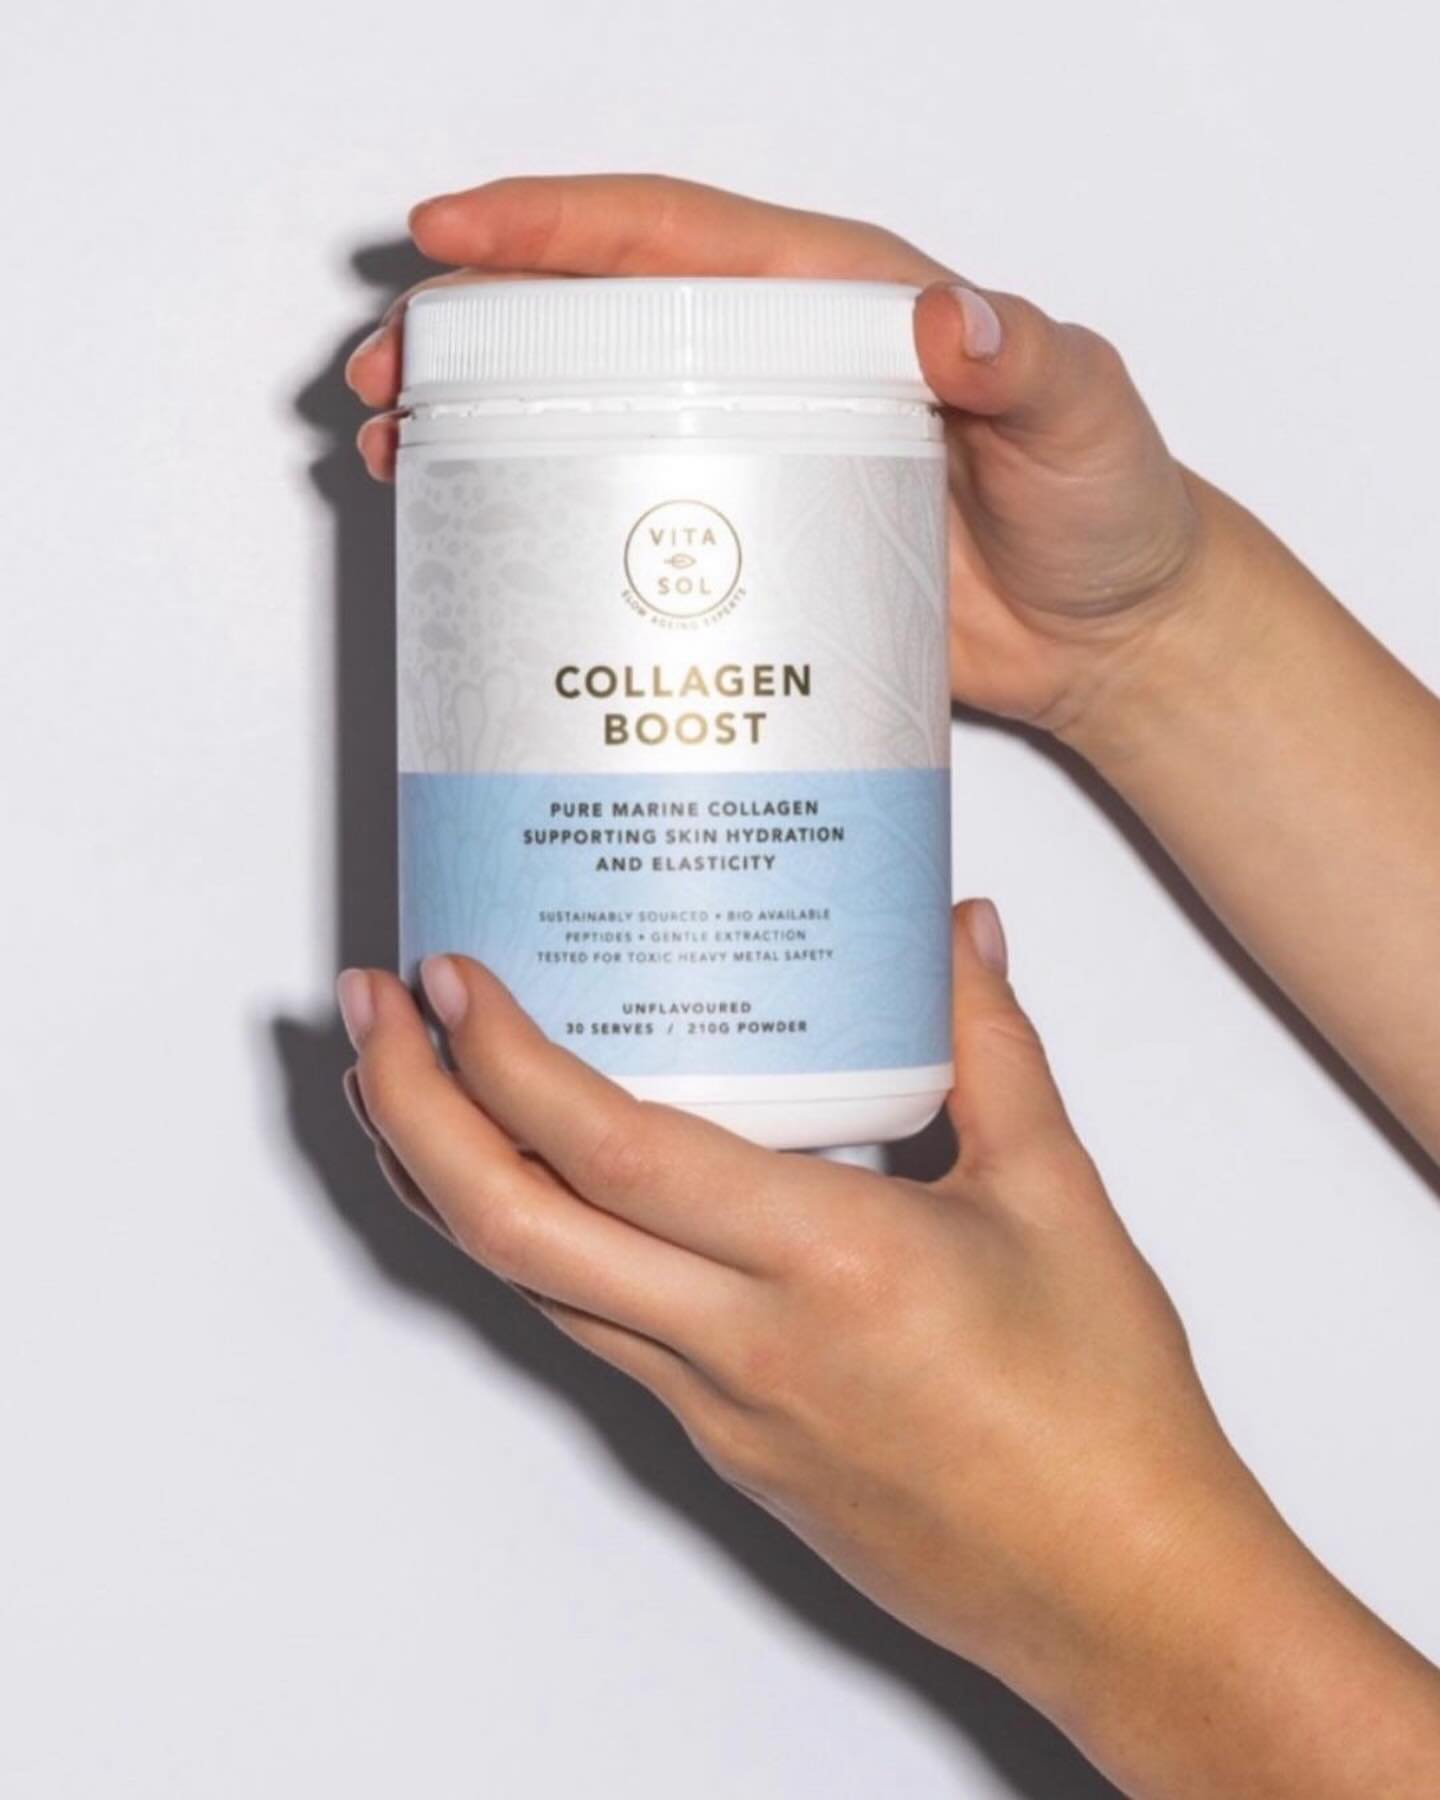 Pure 100% marine collagen peptides (wild caught) to support skin hydration, elasticity and collagen density without added bulking agents such as maltodextrin. Maltodextrin is found in a plethora of ultra processed foods. Some people particularly thos